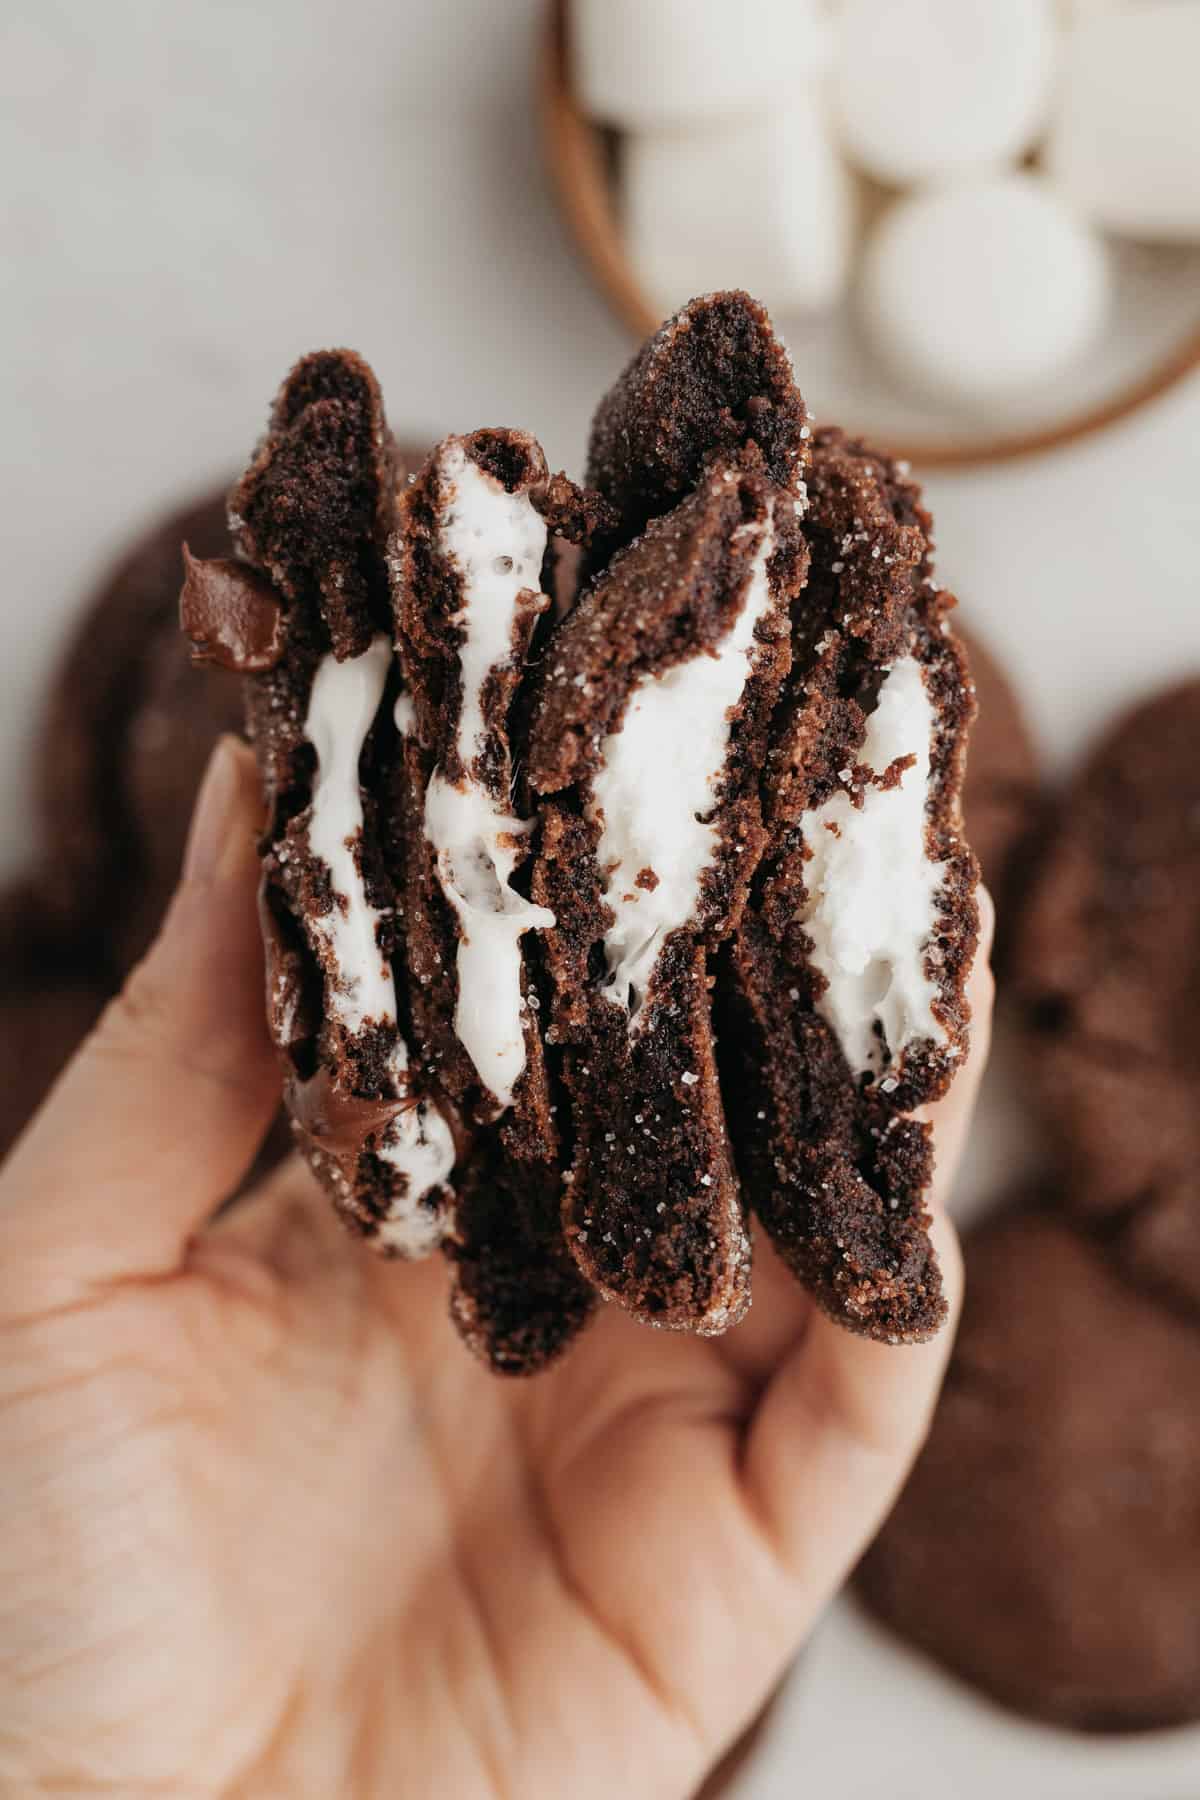 A hand holding four halves of chocolate marshmallow cookies.